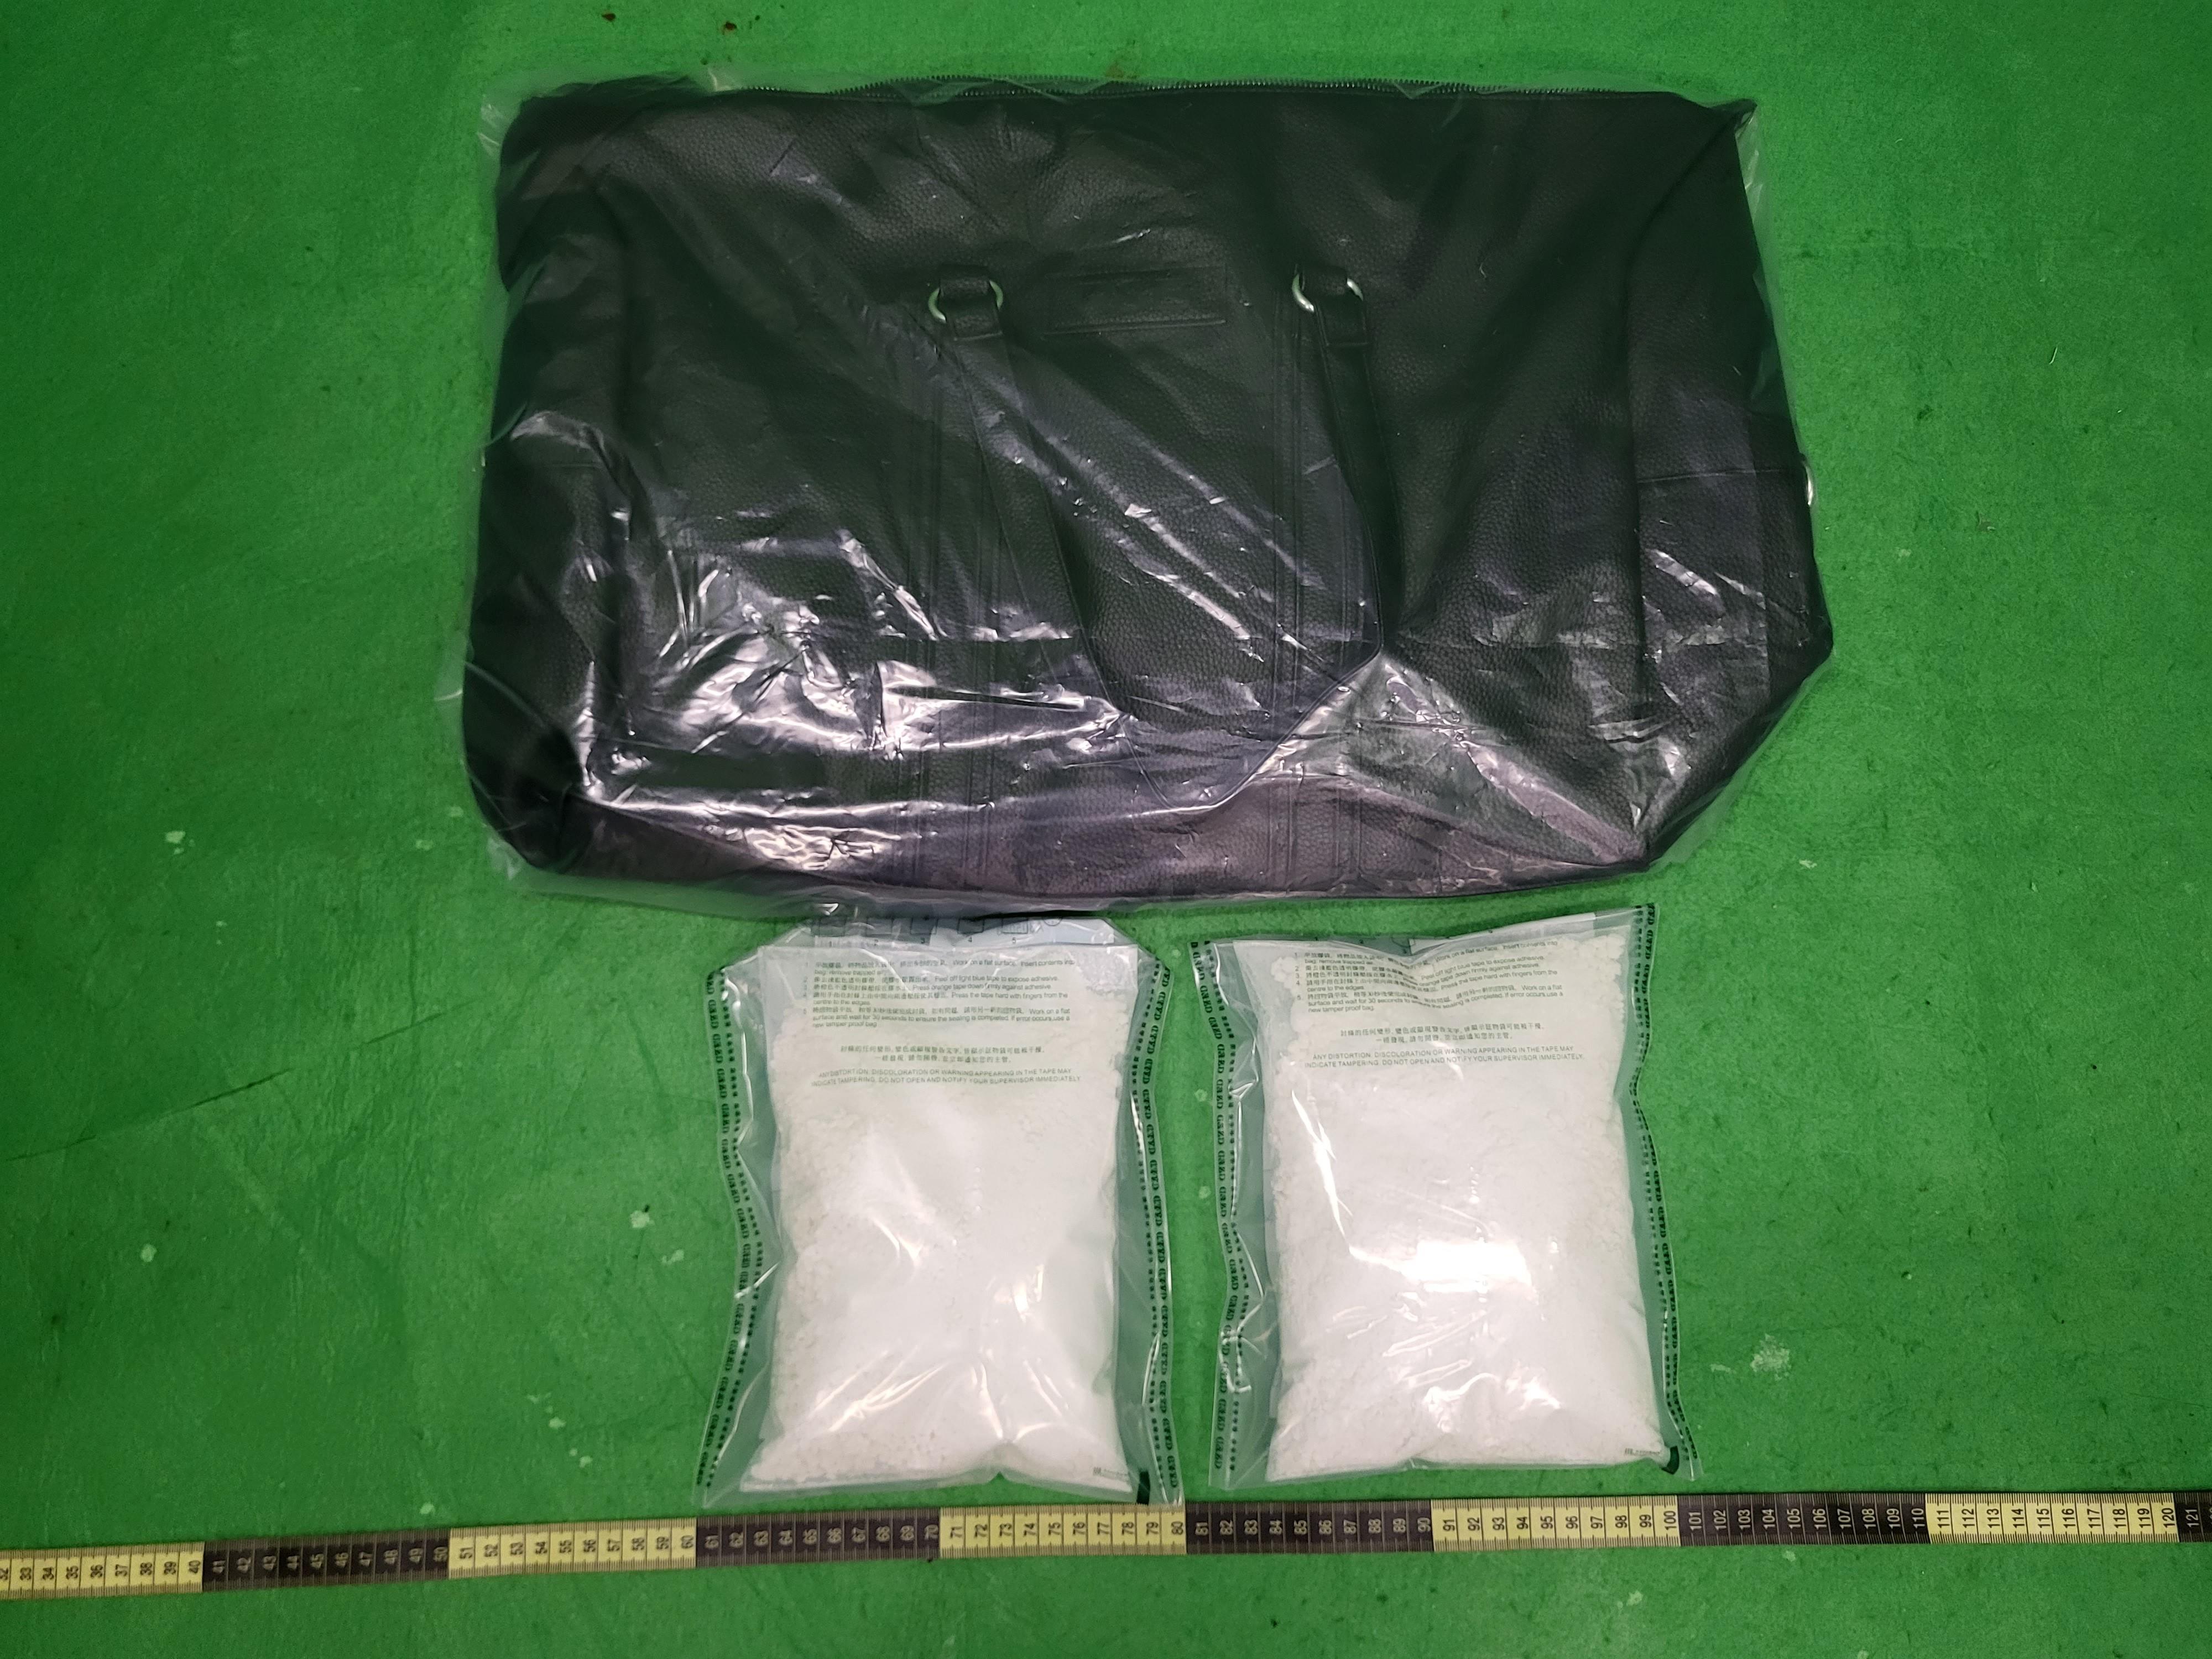 Hong Kong Customs detected two incoming passenger drug trafficking cases at Hong Kong International Airport and seized a total of about 2.5 kilograms of suspected cocaine with an estimated market value of about $2.7 million over the past two days (May 22 and 23). Photo shows the suspected cocaine seized by Customs officers in the second case and the hand-carry baggage used to conceal the drug.